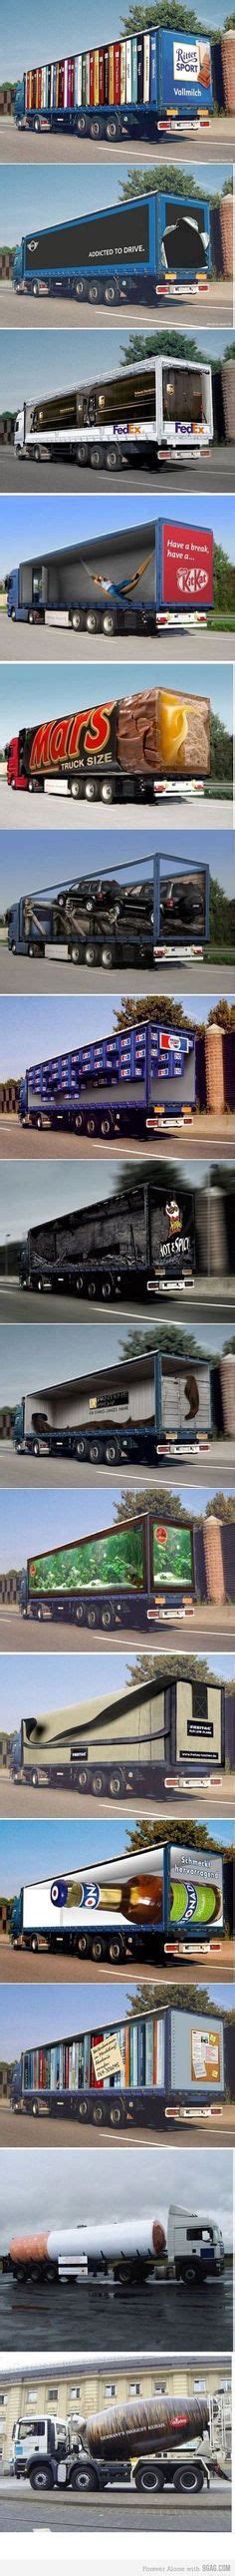 Awesome Advertising By Guerilla Marketing Guerrilla Advertising